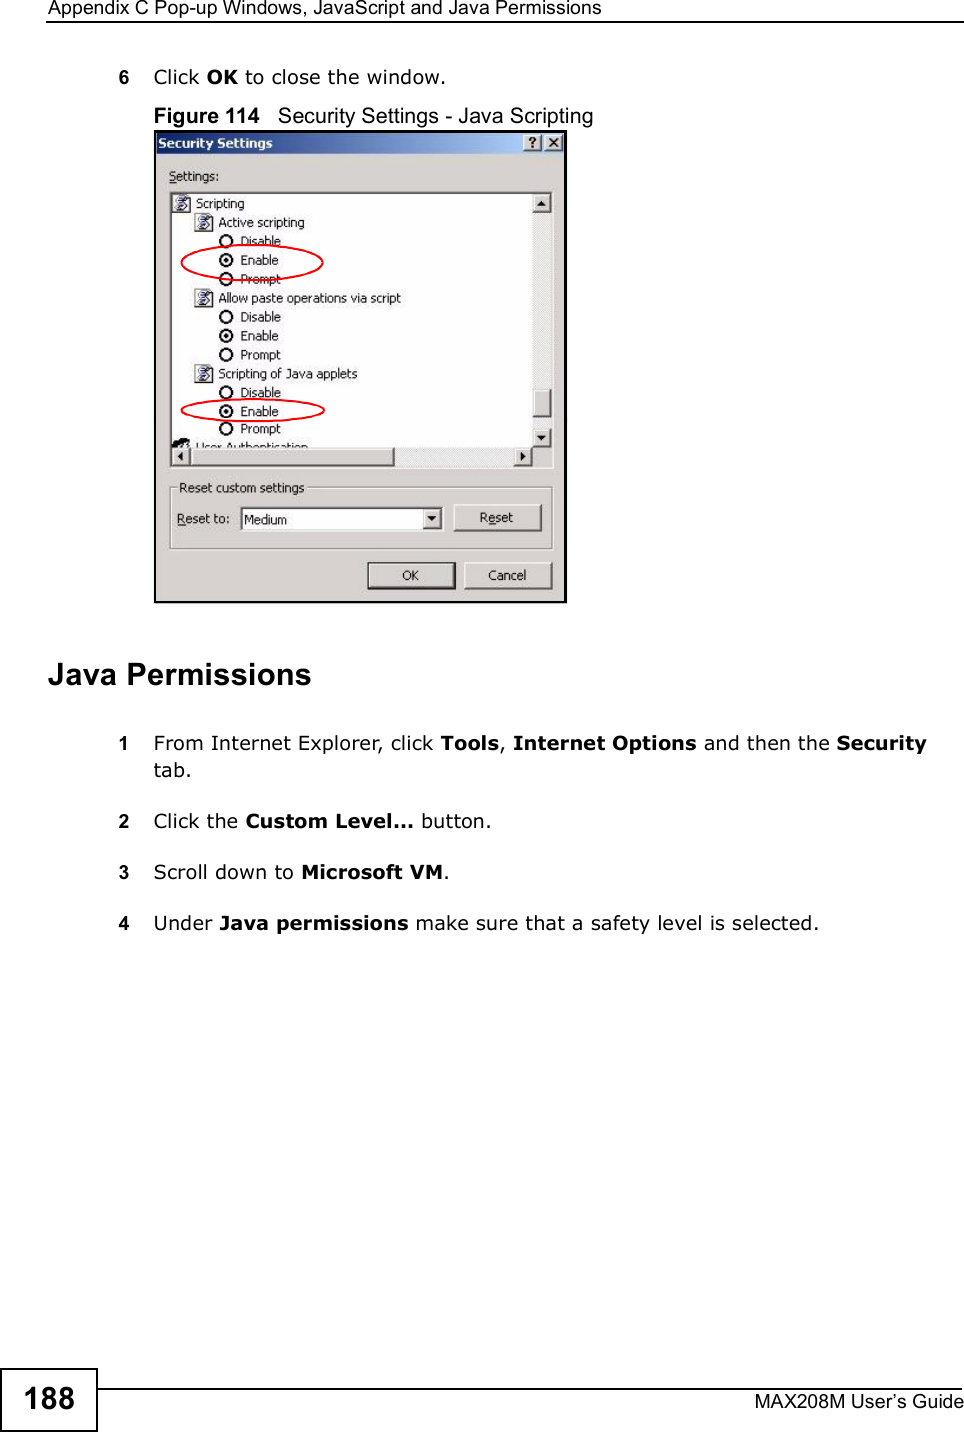 Appendix CPop-up Windows, JavaScript and Java PermissionsMAX208M User s Guide1886Click OK to close the window.Figure 114   Security Settings - Java ScriptingJava Permissions1From Internet Explorer, click Tools, Internet Options and then the Security tab. 2Click the Custom Level... button. 3Scroll down to Microsoft VM. 4Under Java permissions make sure that a safety level is selected.